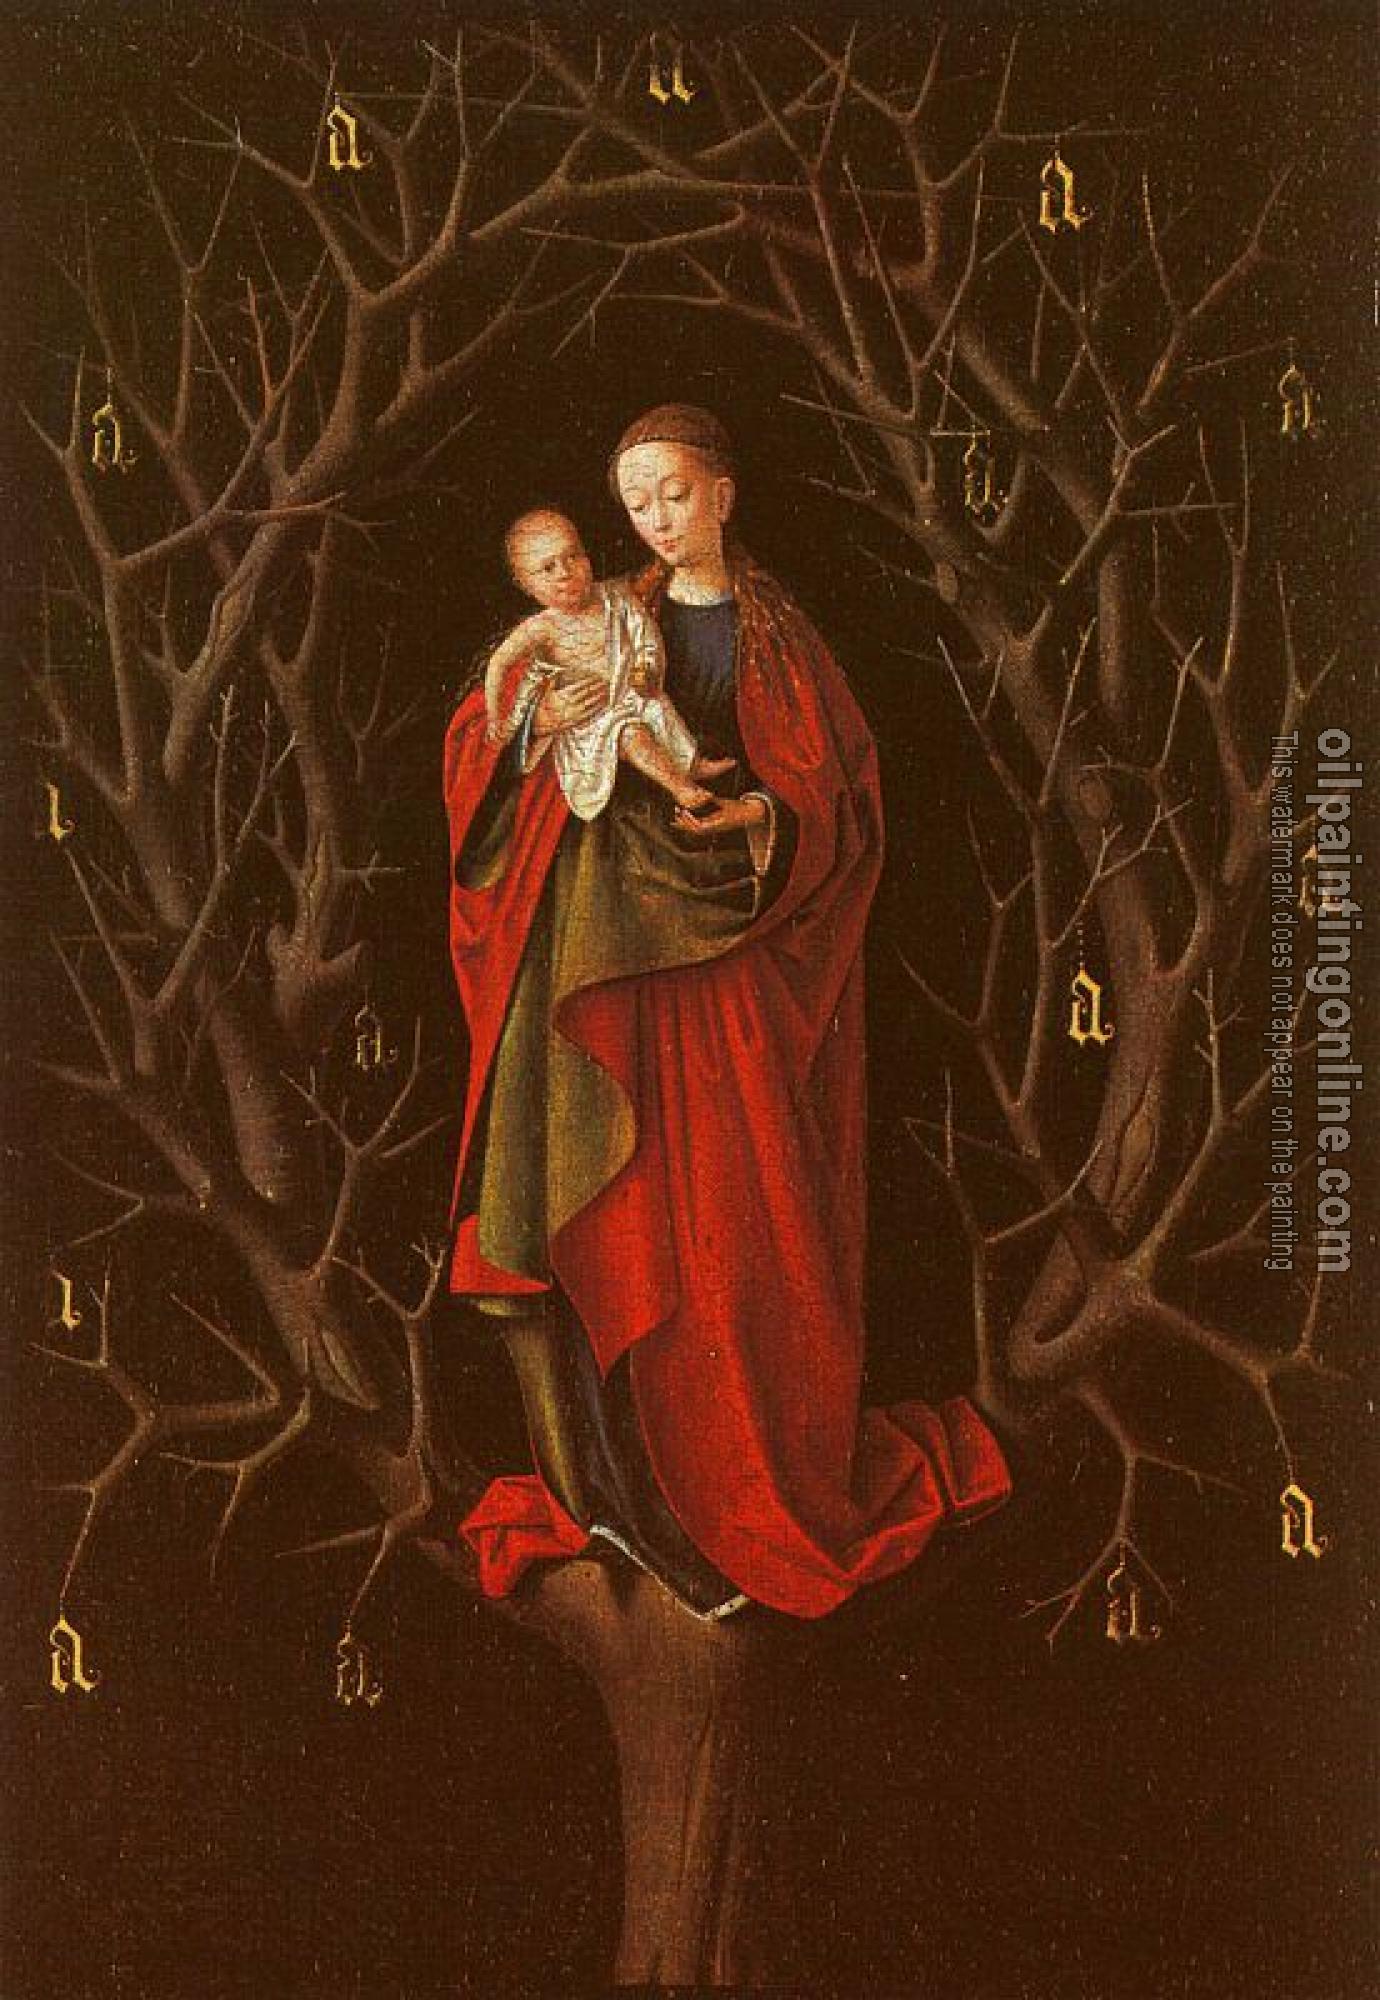 Christus, Petrus - Our Lady of the Barren Tree